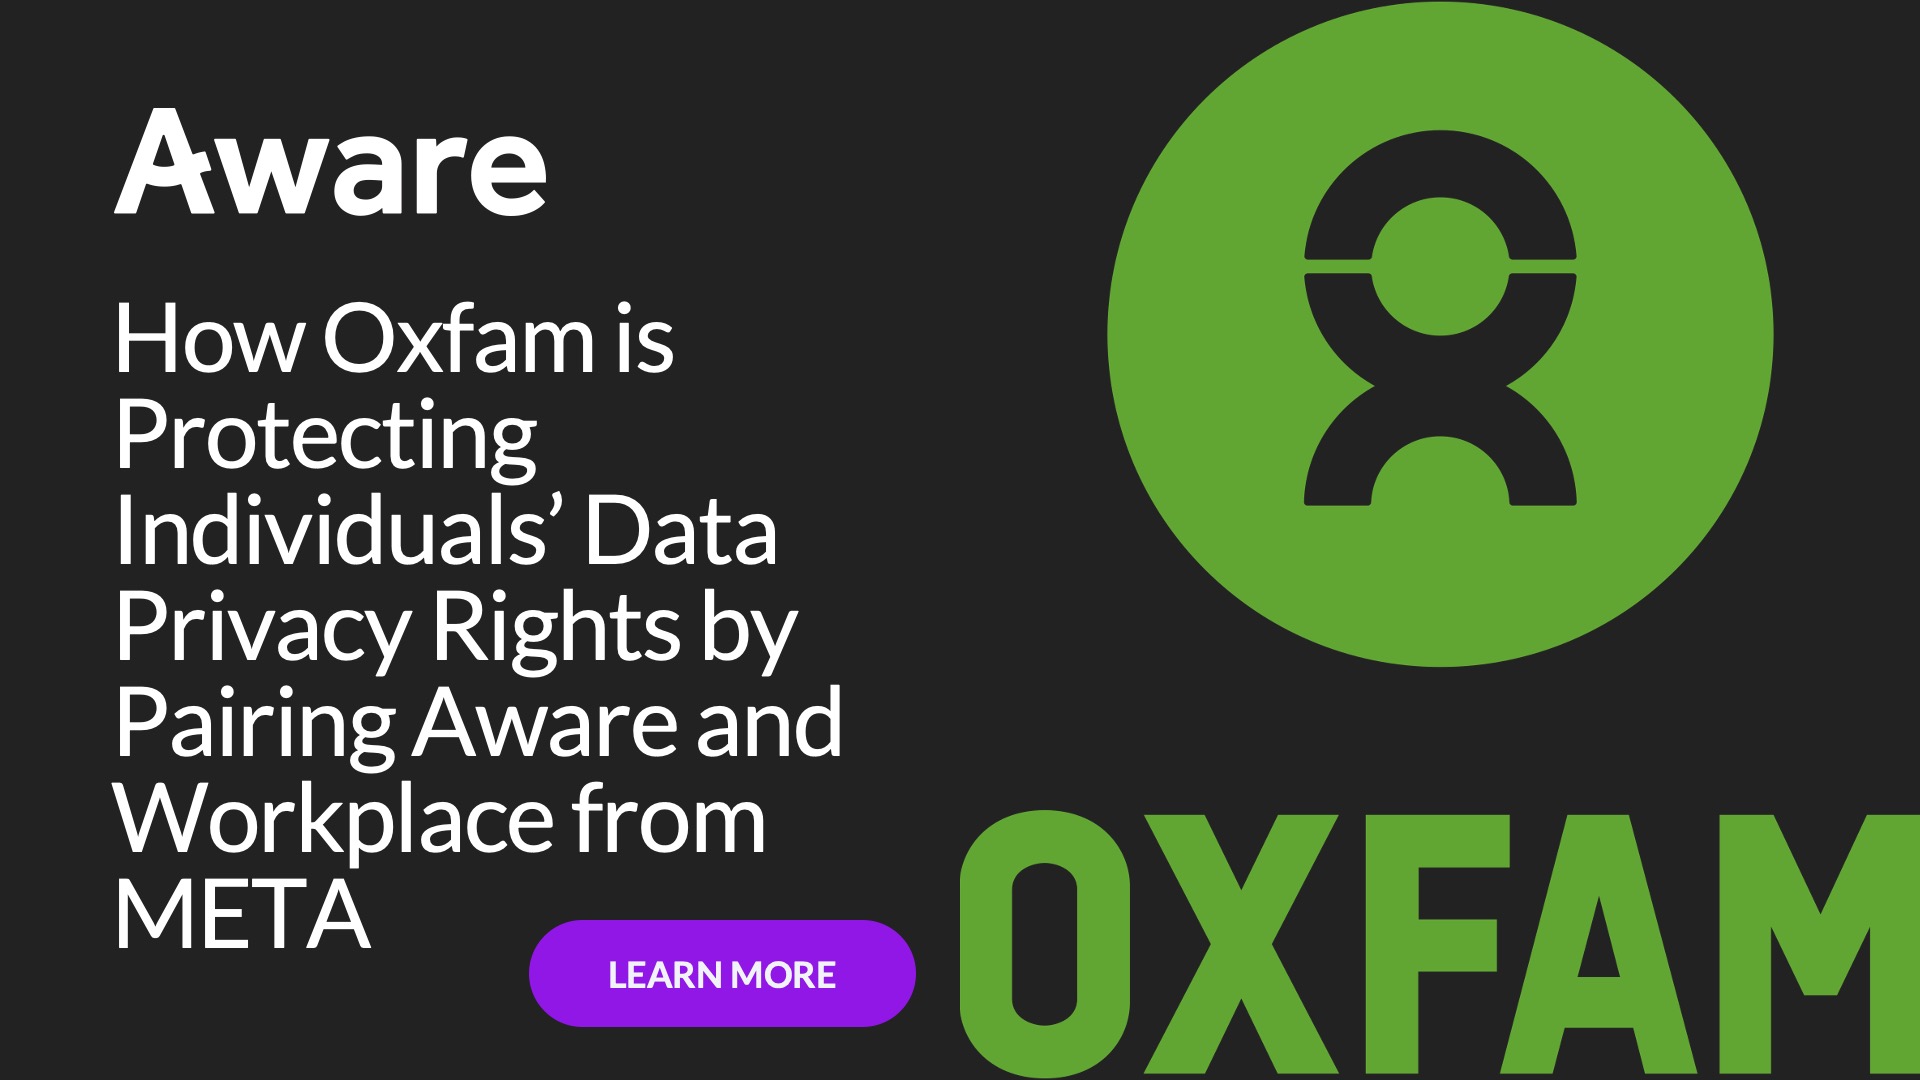 How Oxfam is Protecting Individuals’ Data Privacy Rights by Pairing Aware and Workplace from META